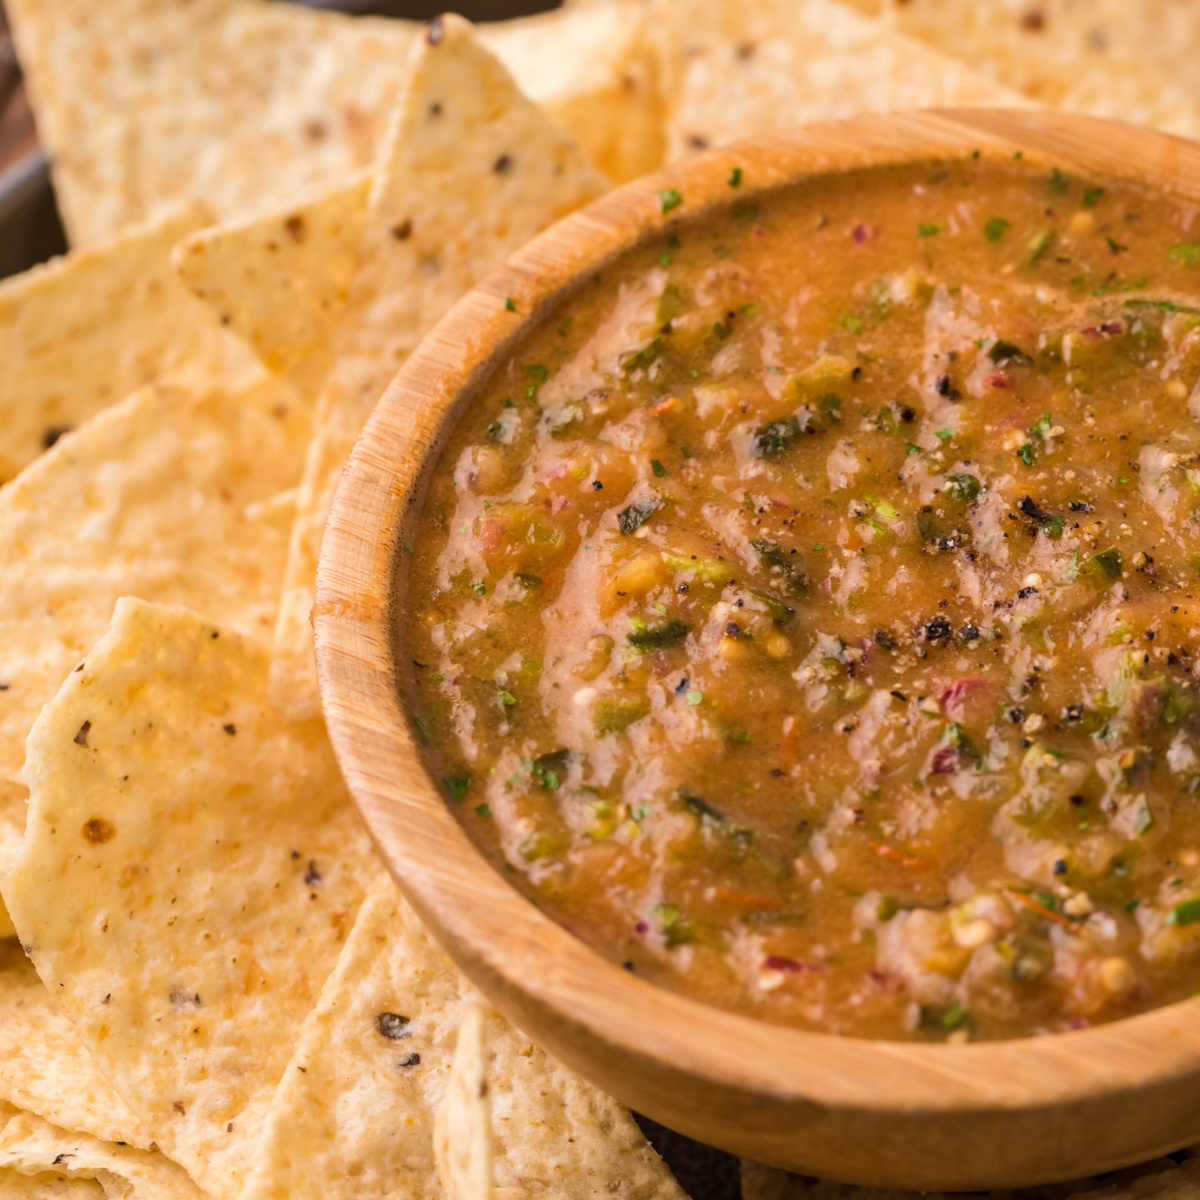 Smoked salsa in a wooden bowl with tortilla chips.